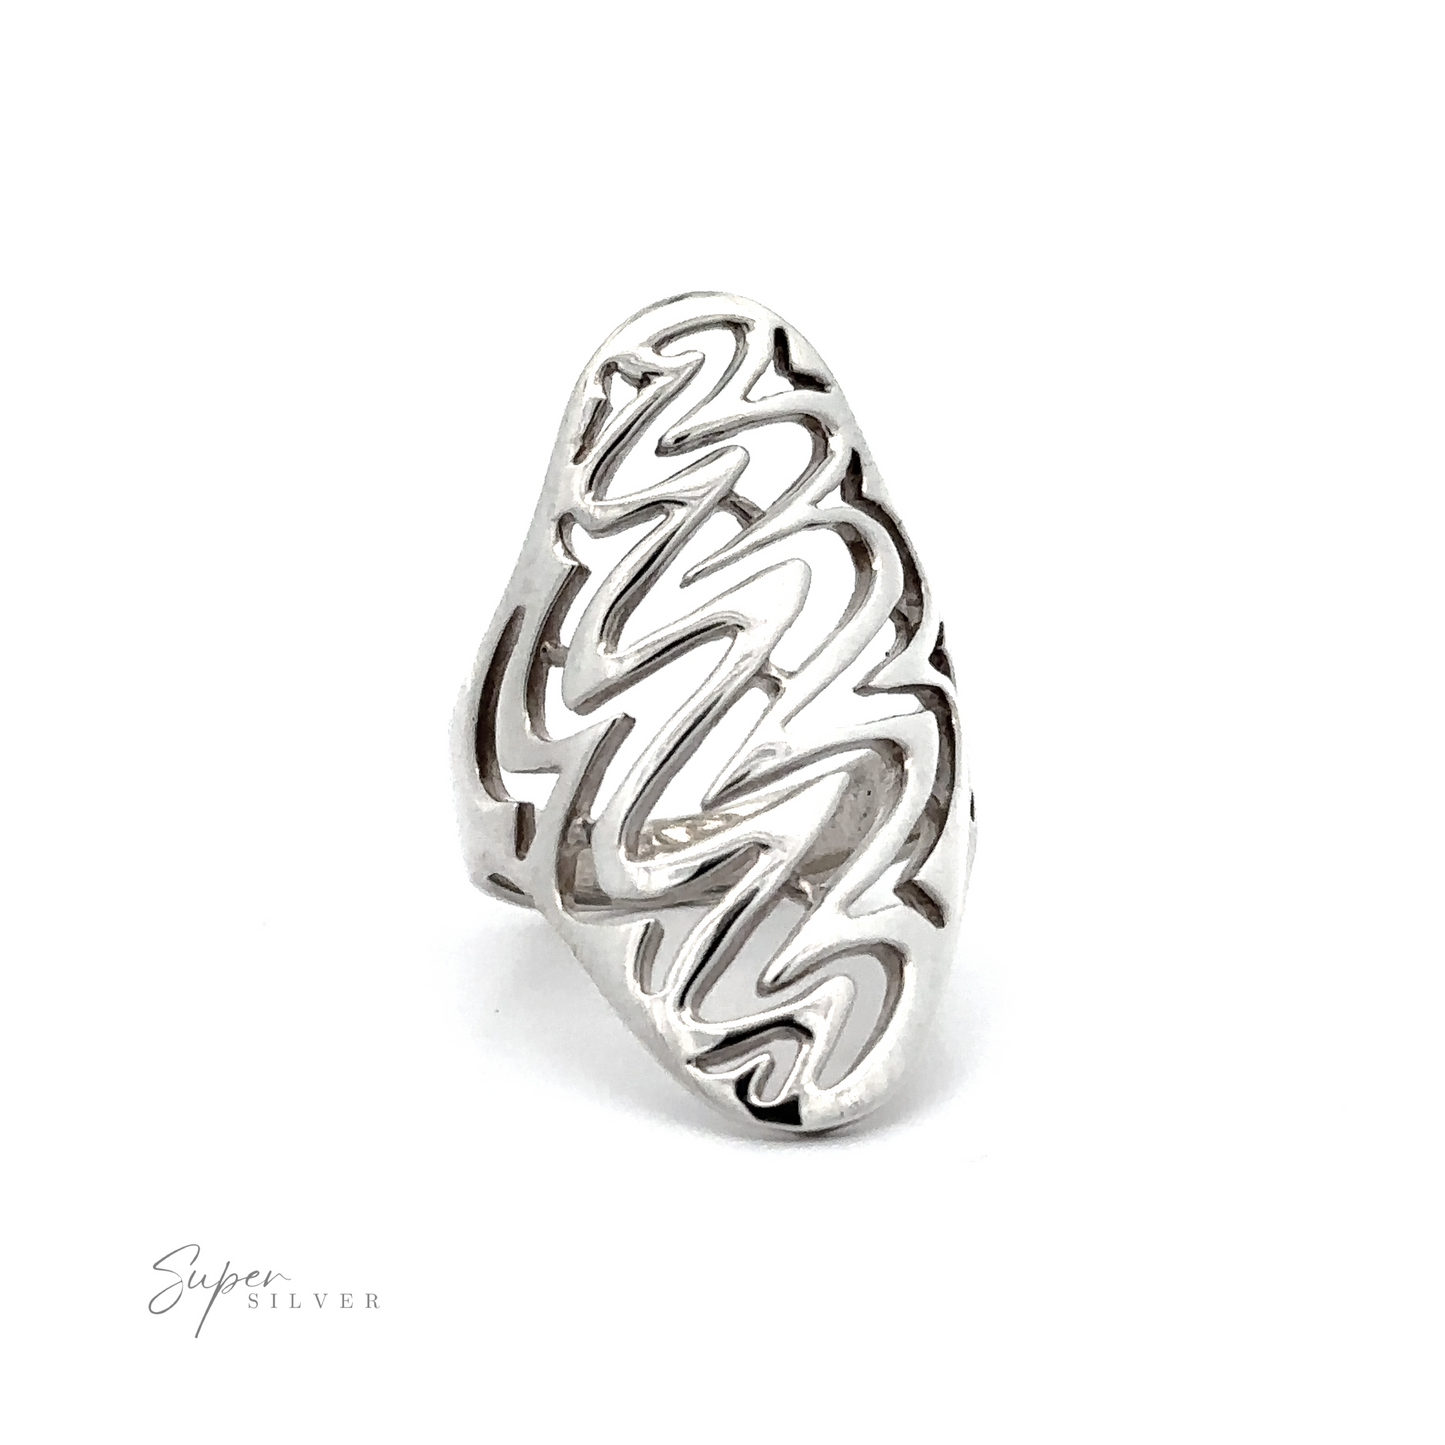 An Oval Freestyle Band Silver Ring with a swirl design.